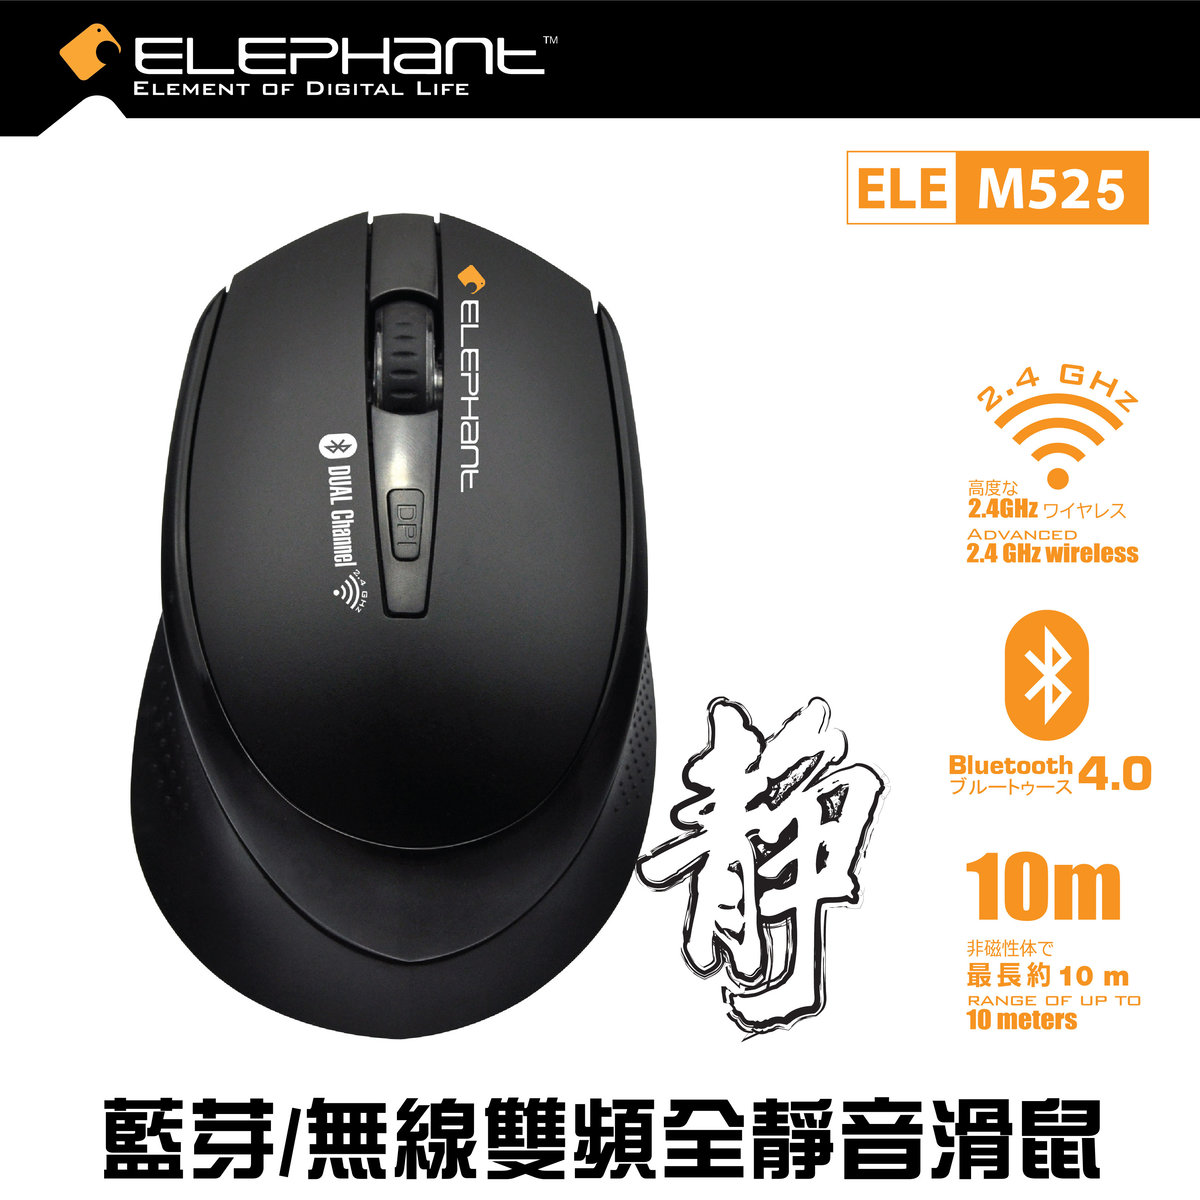 M525 Bluetooth 4.0 and Wireless 2.4G Mouse